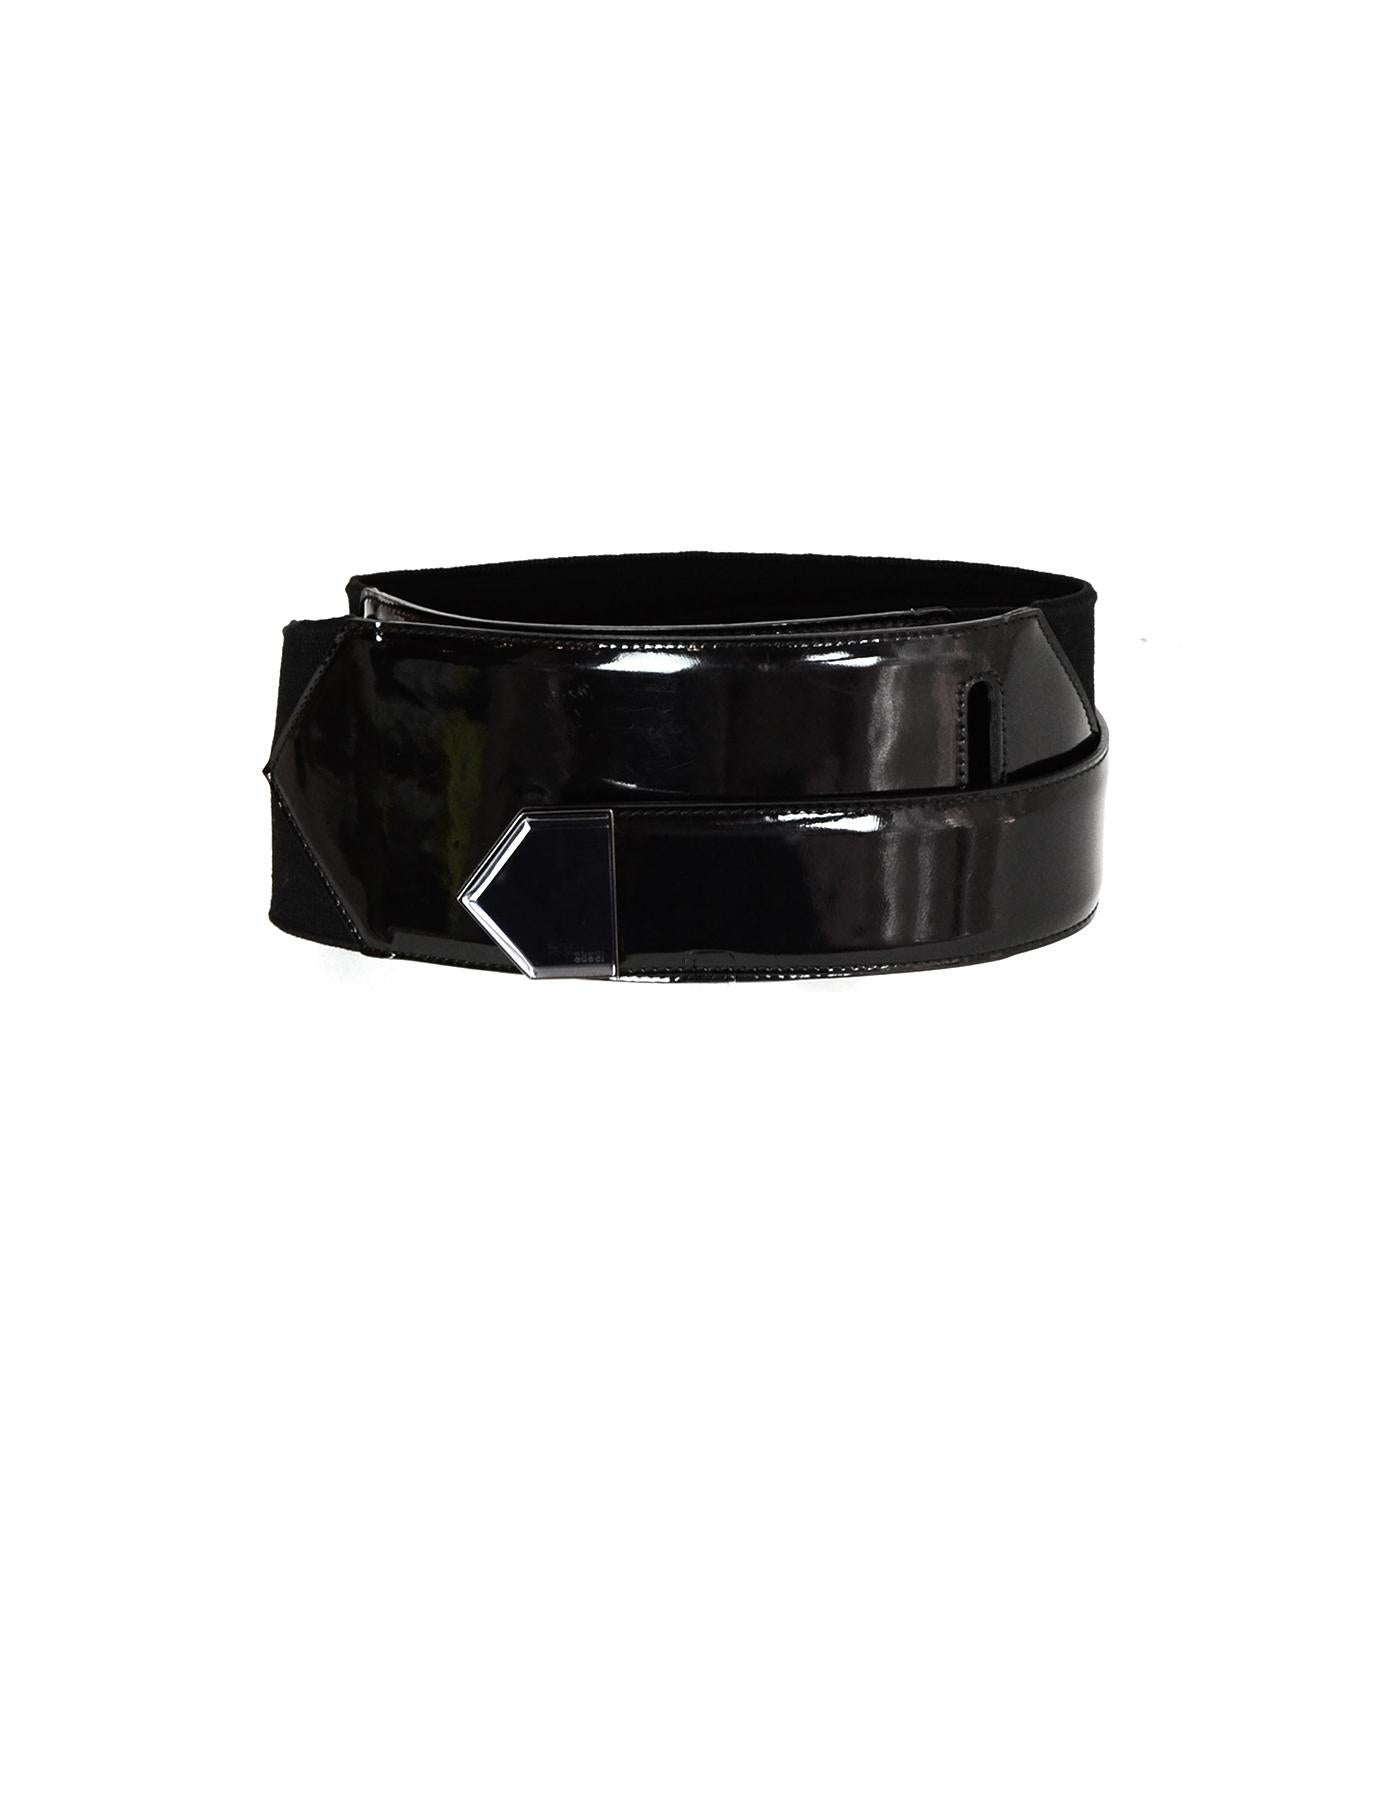 Gucci Black Patent Wrap Belt sz 34 rt $750 In Excellent Condition In New York, NY